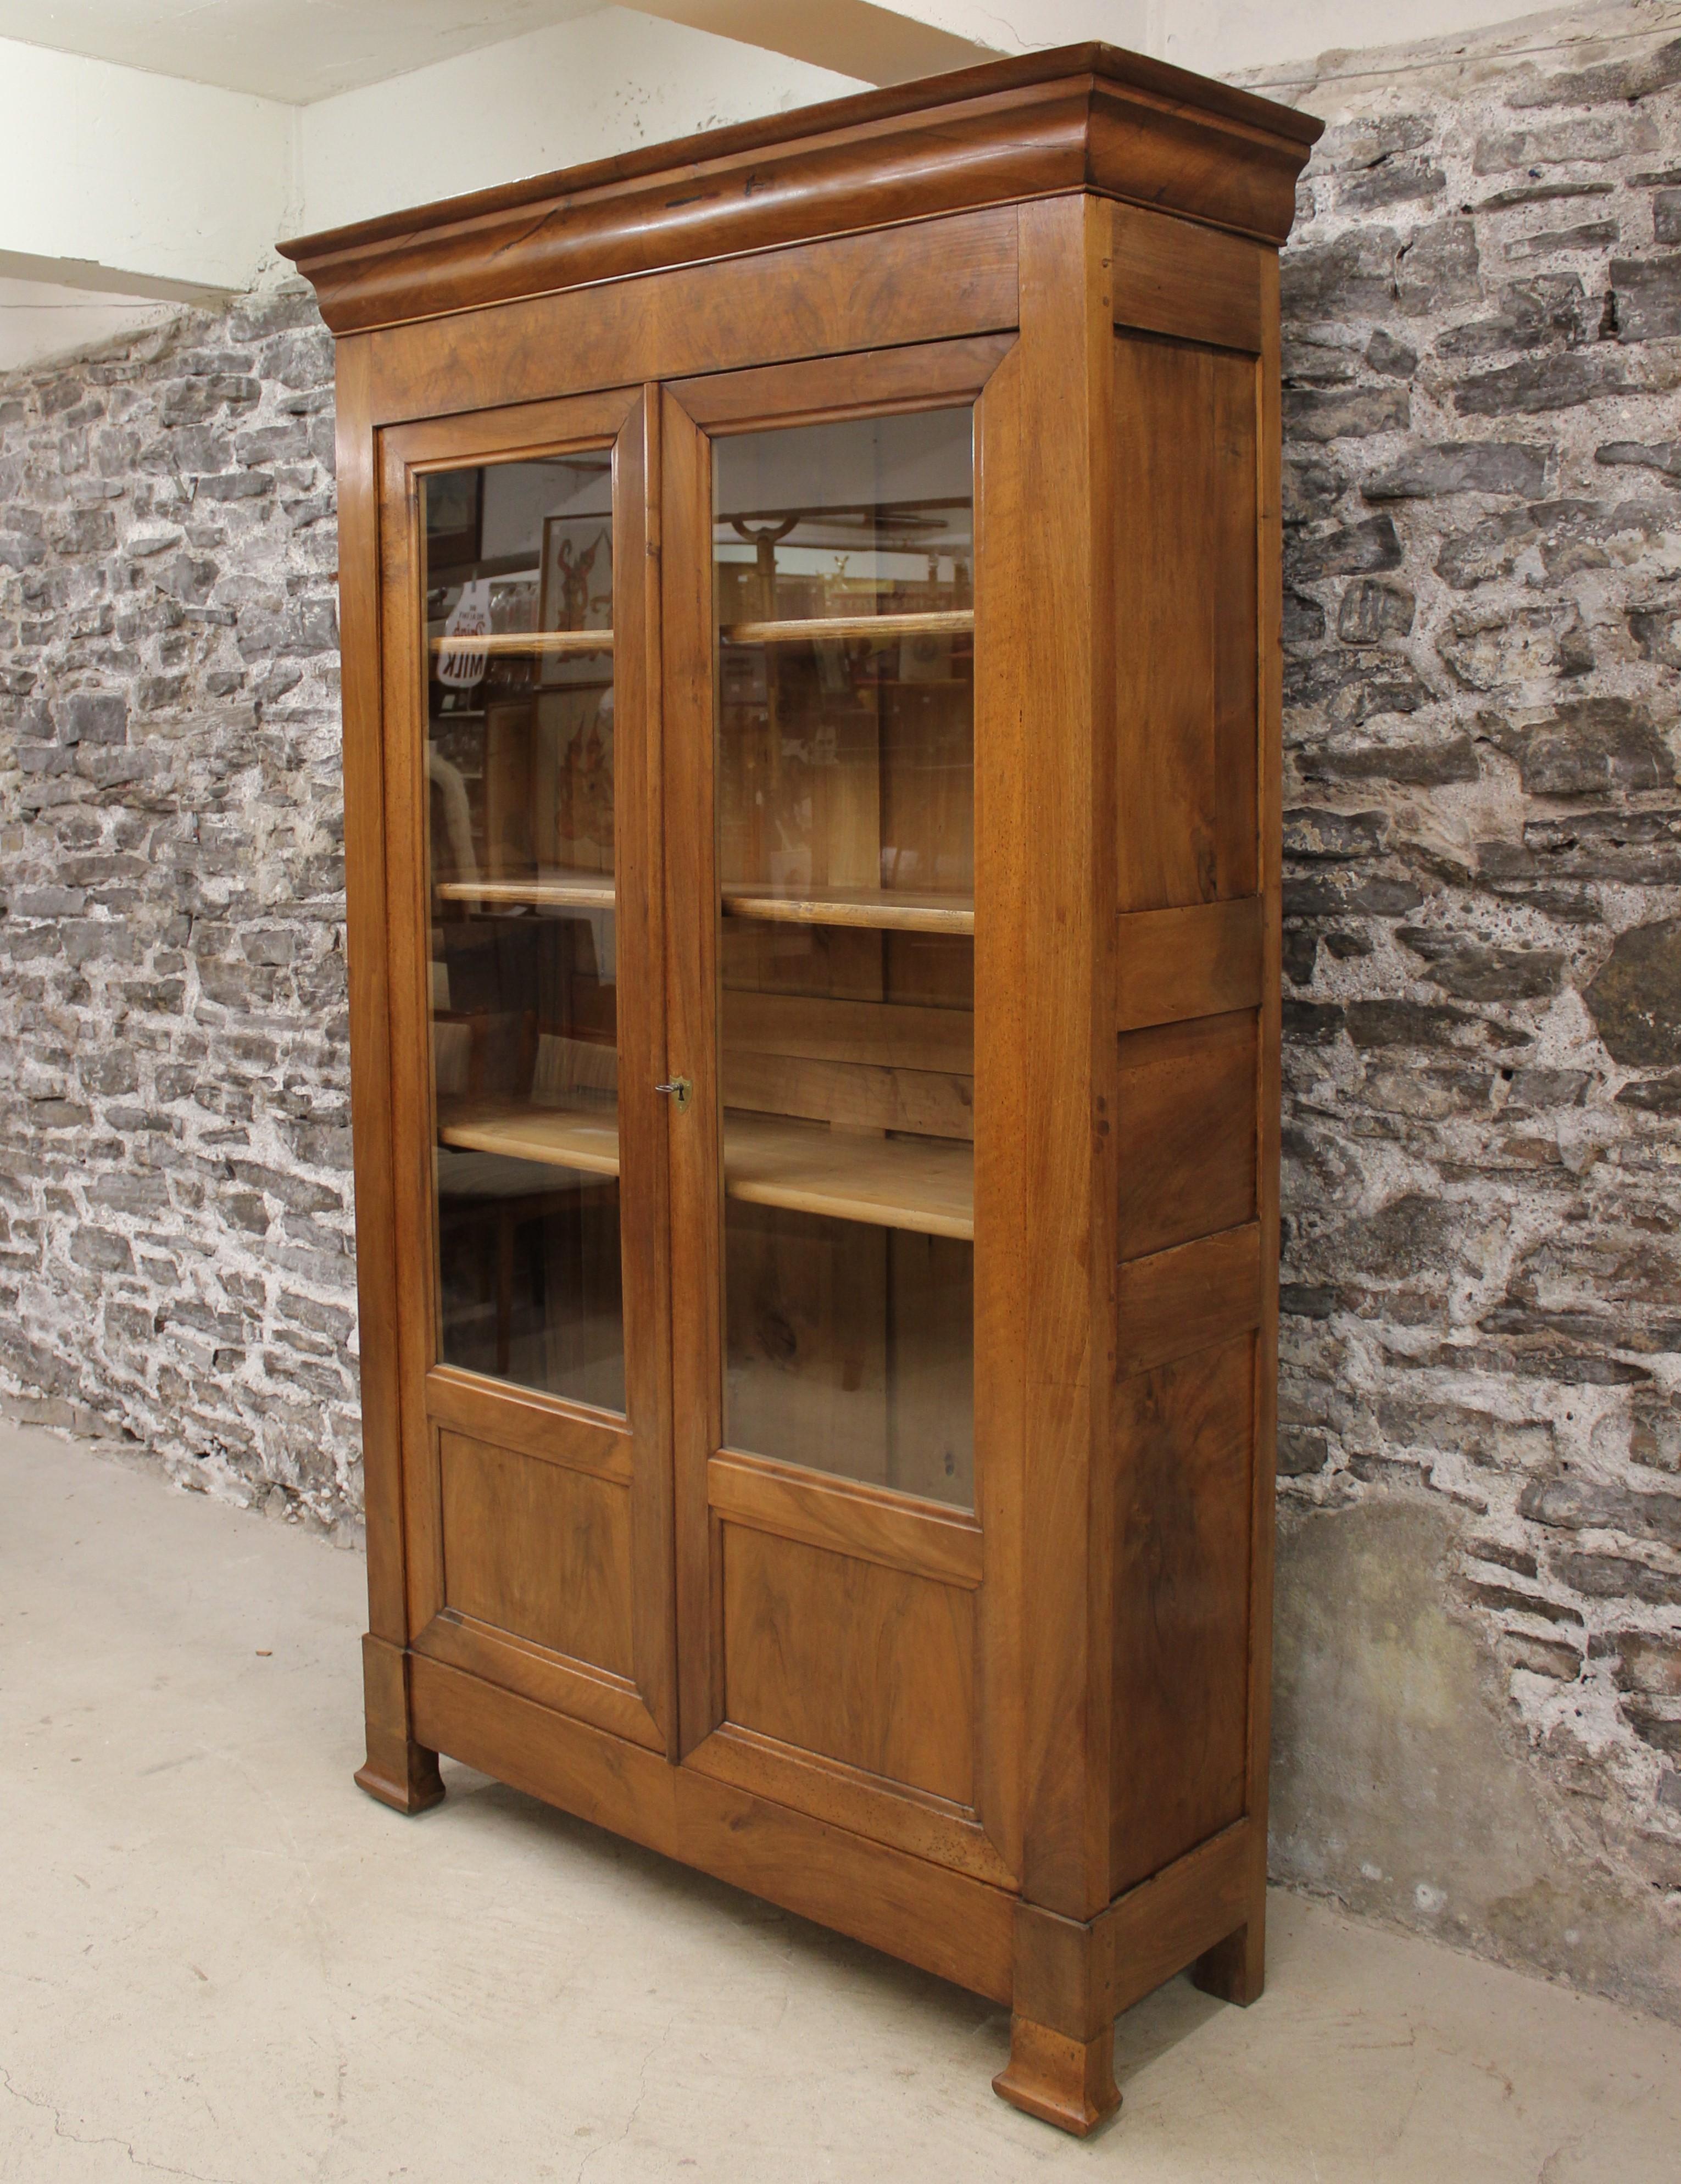 This 19th century French Louis Philippe style walnut cabinet offer a Classic French design. It has two glass doors and provides ample storage. This would be a perfect fit for either a kitchen or library.